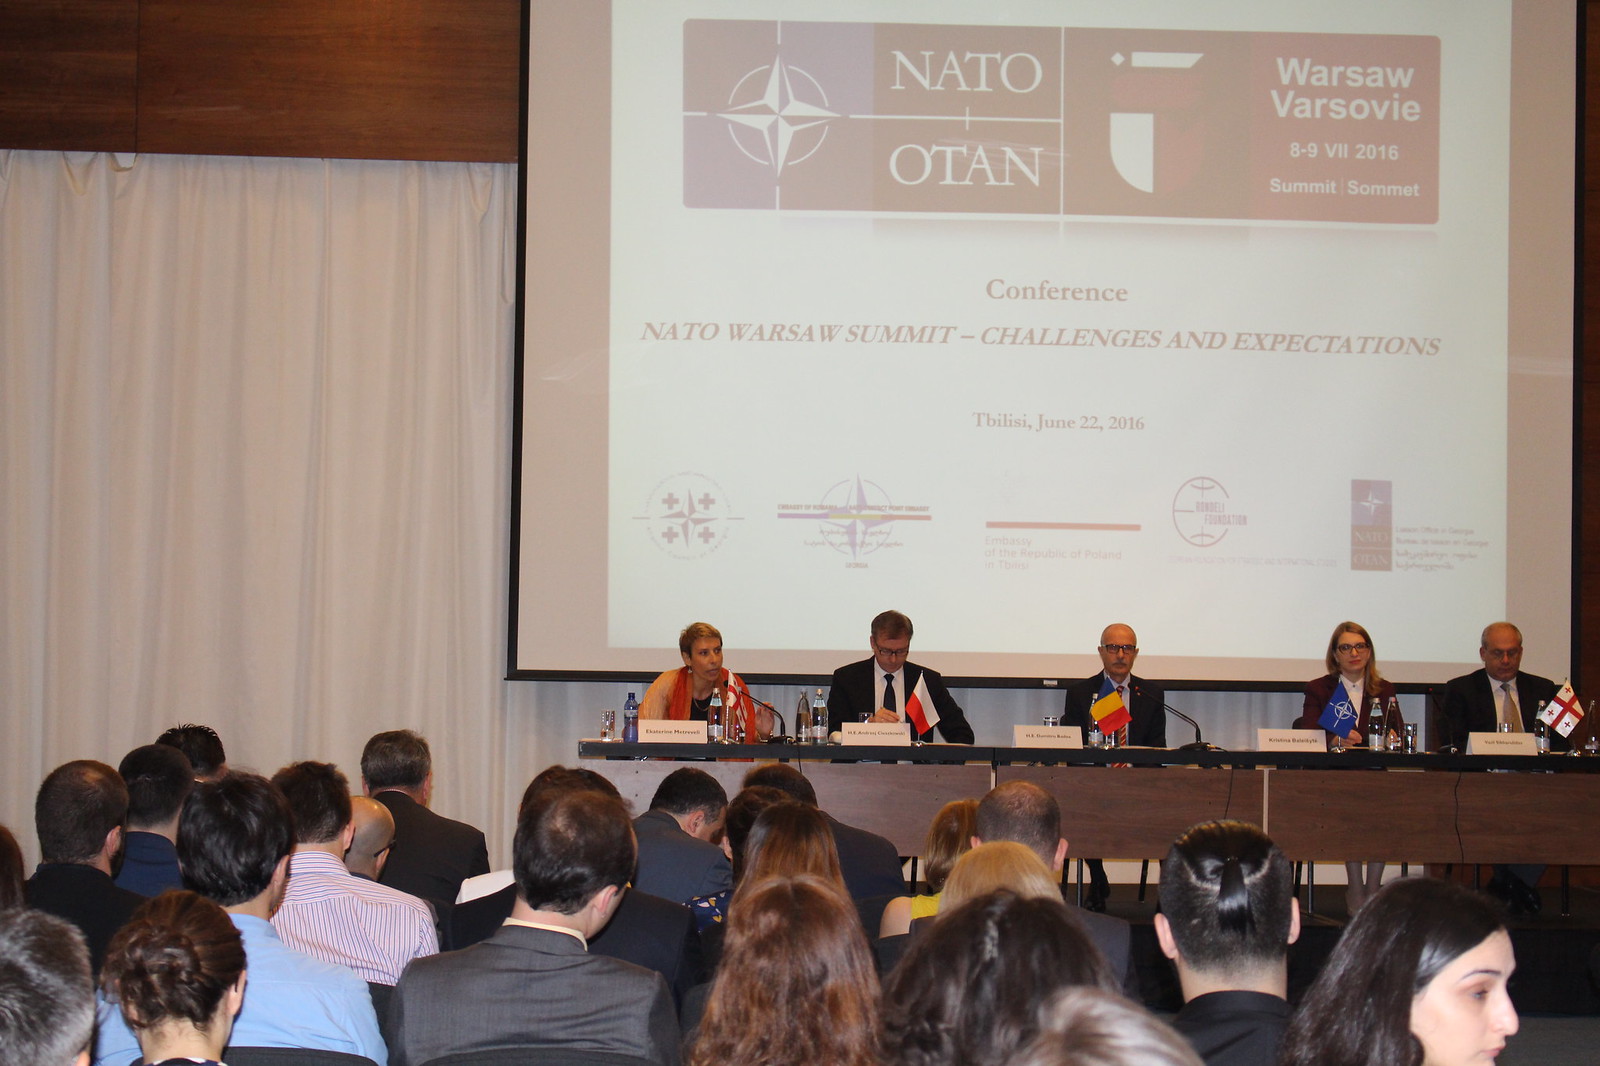 Conference "NATo Warsaw Summit - Challenges and Expectations" June 22, 2016